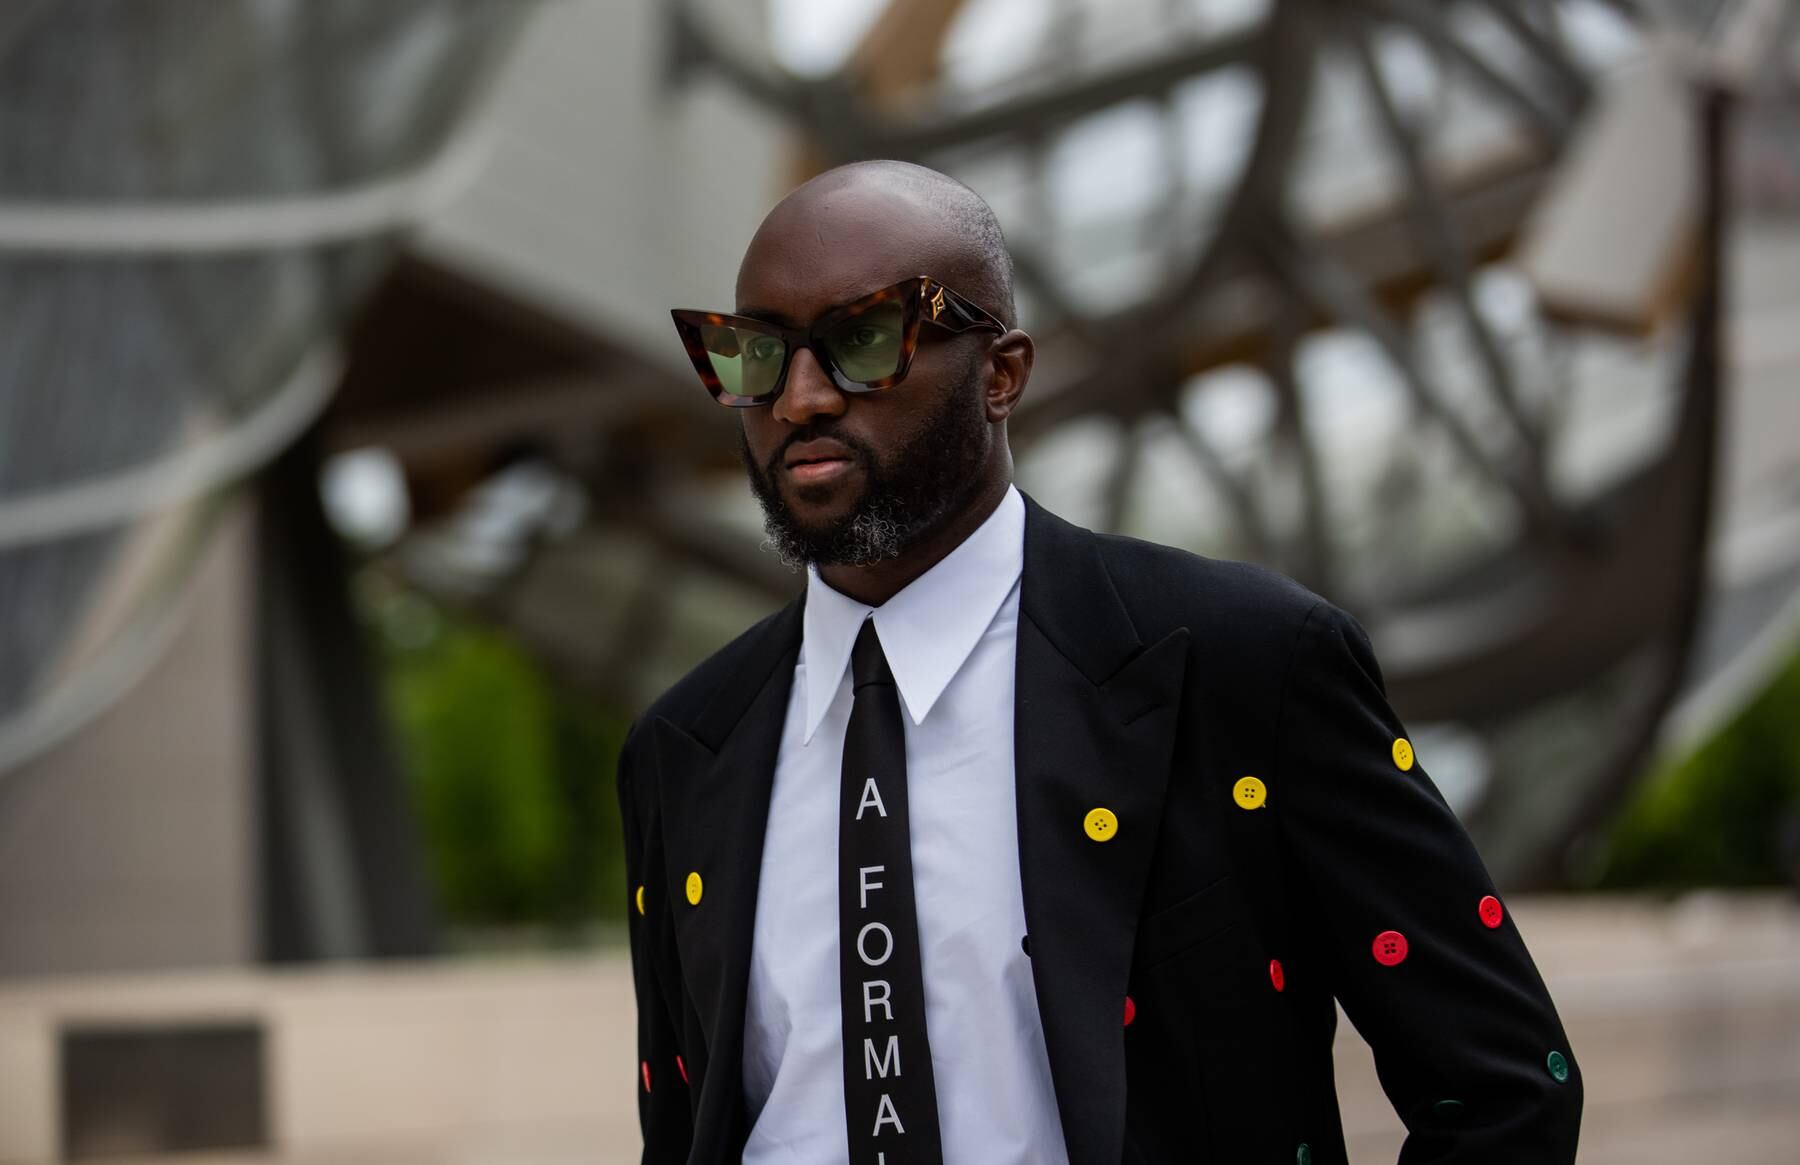 LVMH has agreed to acquire a 60 percent stake in the trademark for Virgil Abloh's luxury streetwear label Off-White, deepening the relationship between the designer and French luxury conglomerate.